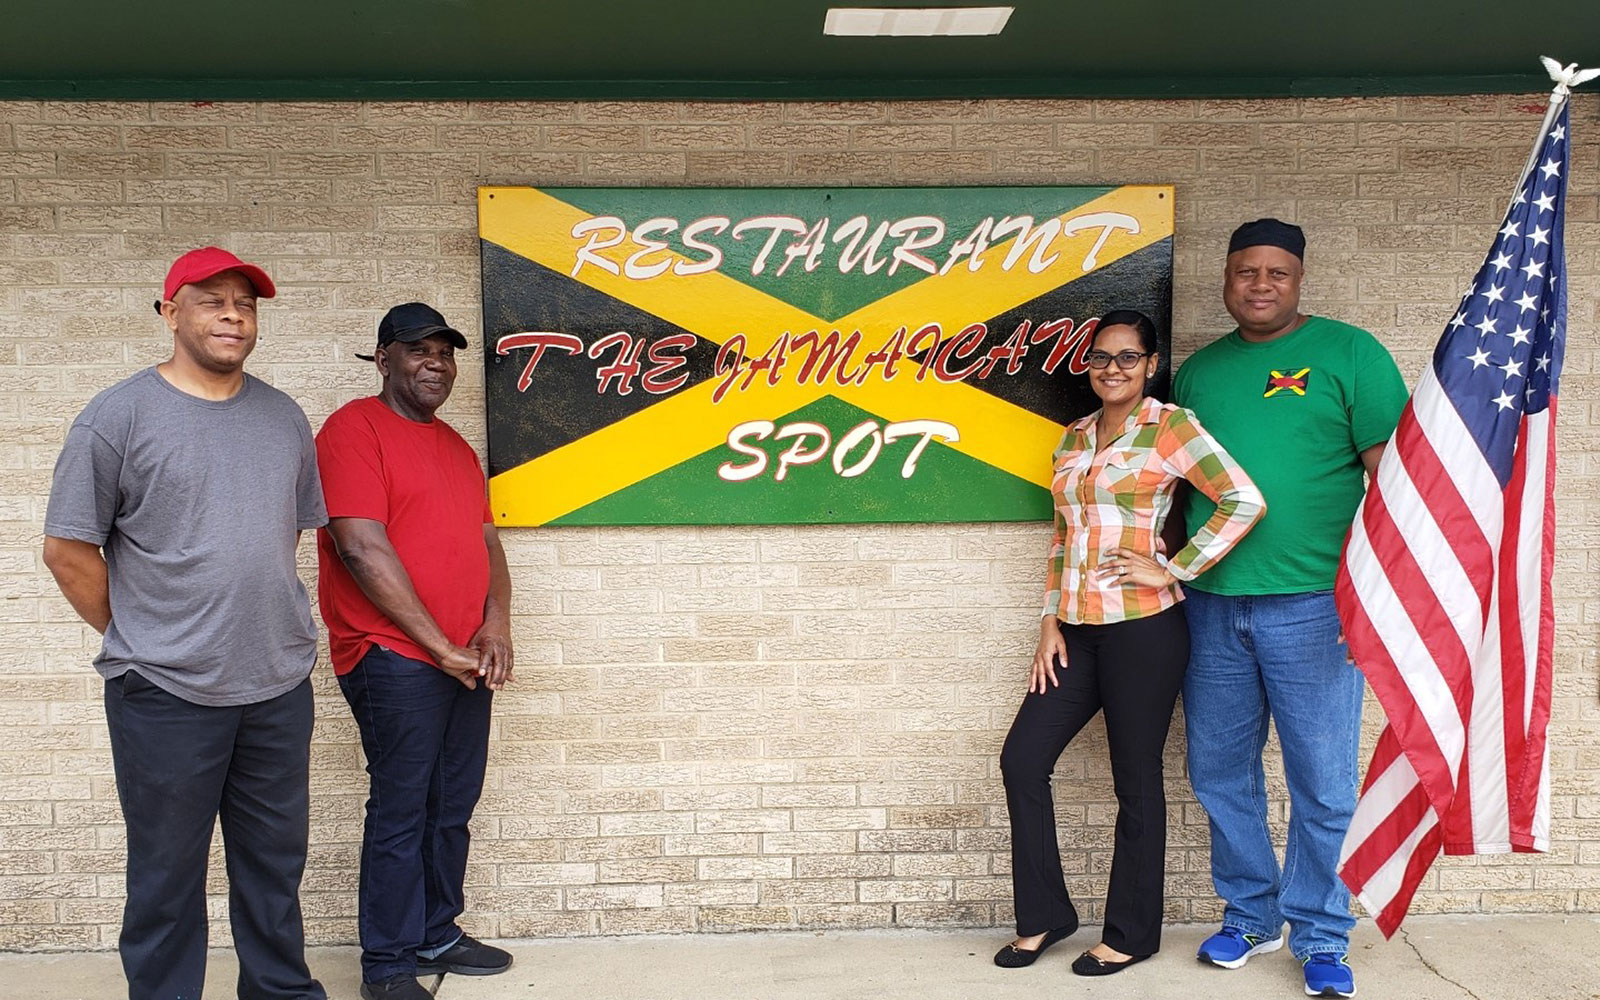 Restaurant owners stand in front of the Jamaican Spot sign